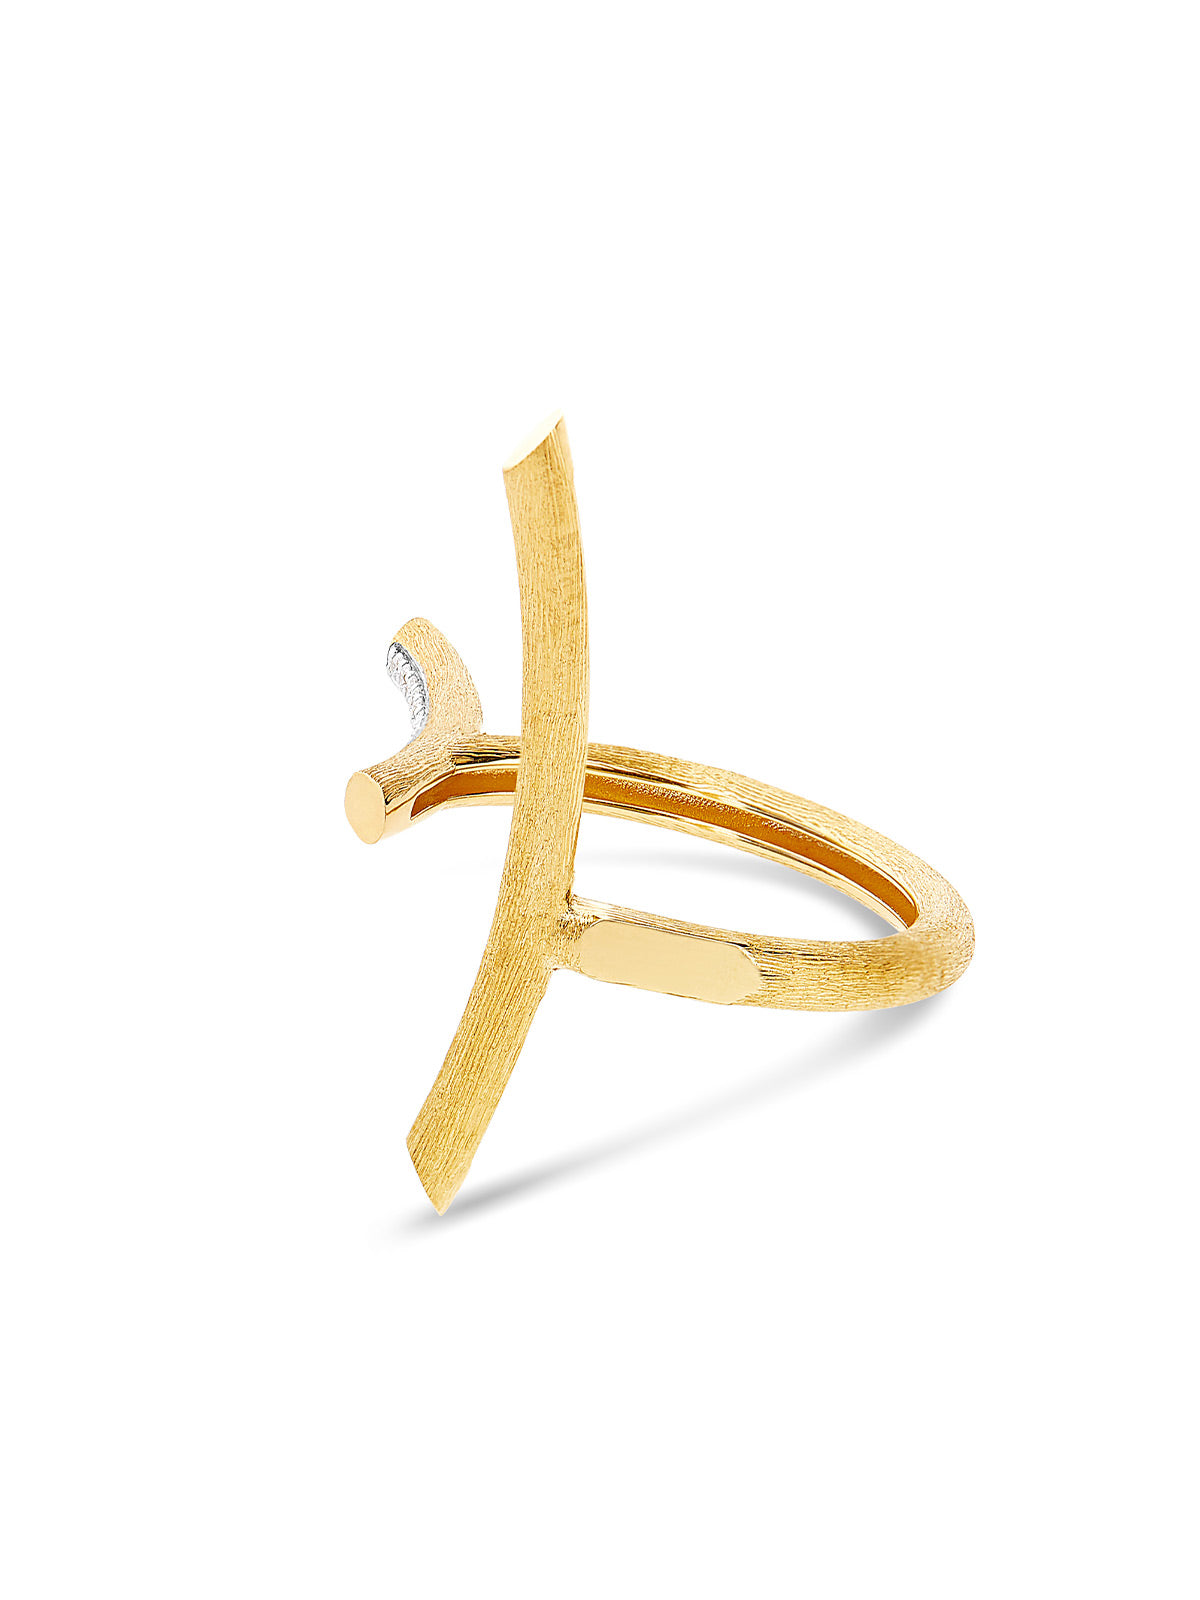 Libera Gold and diamonds double face ring